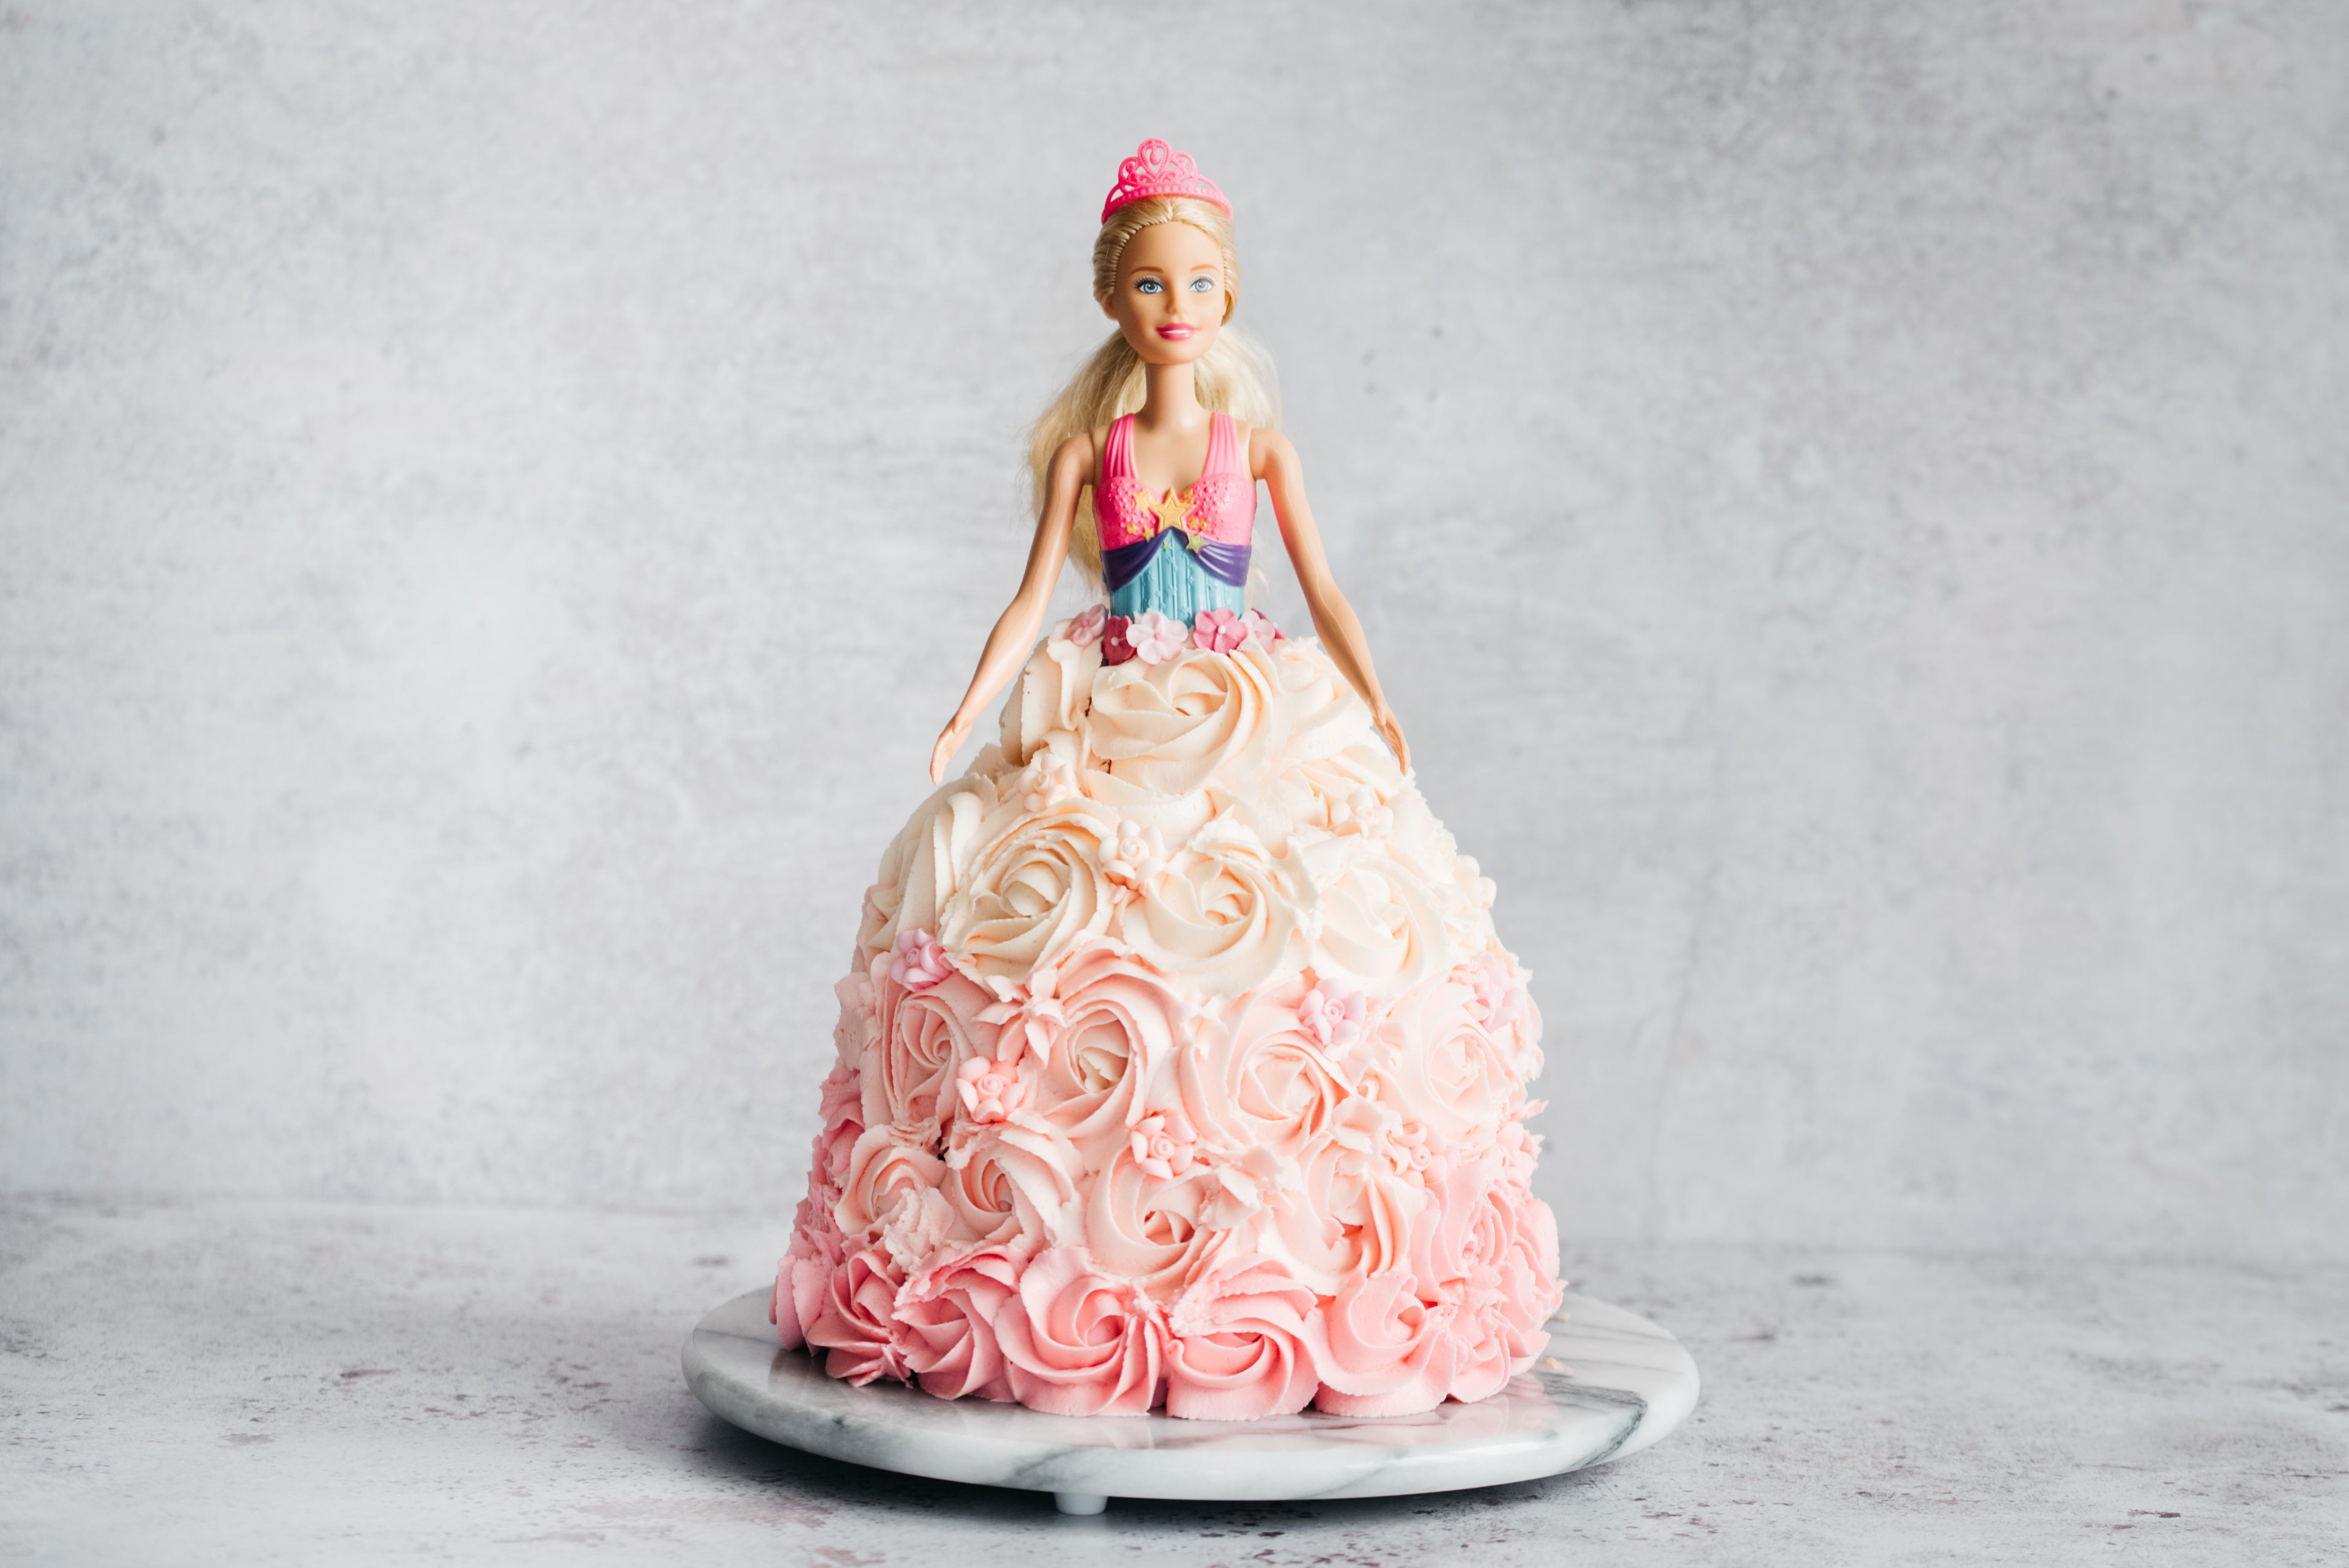 Princess Barbie Cake decorated with pink and white swirls ready to serve